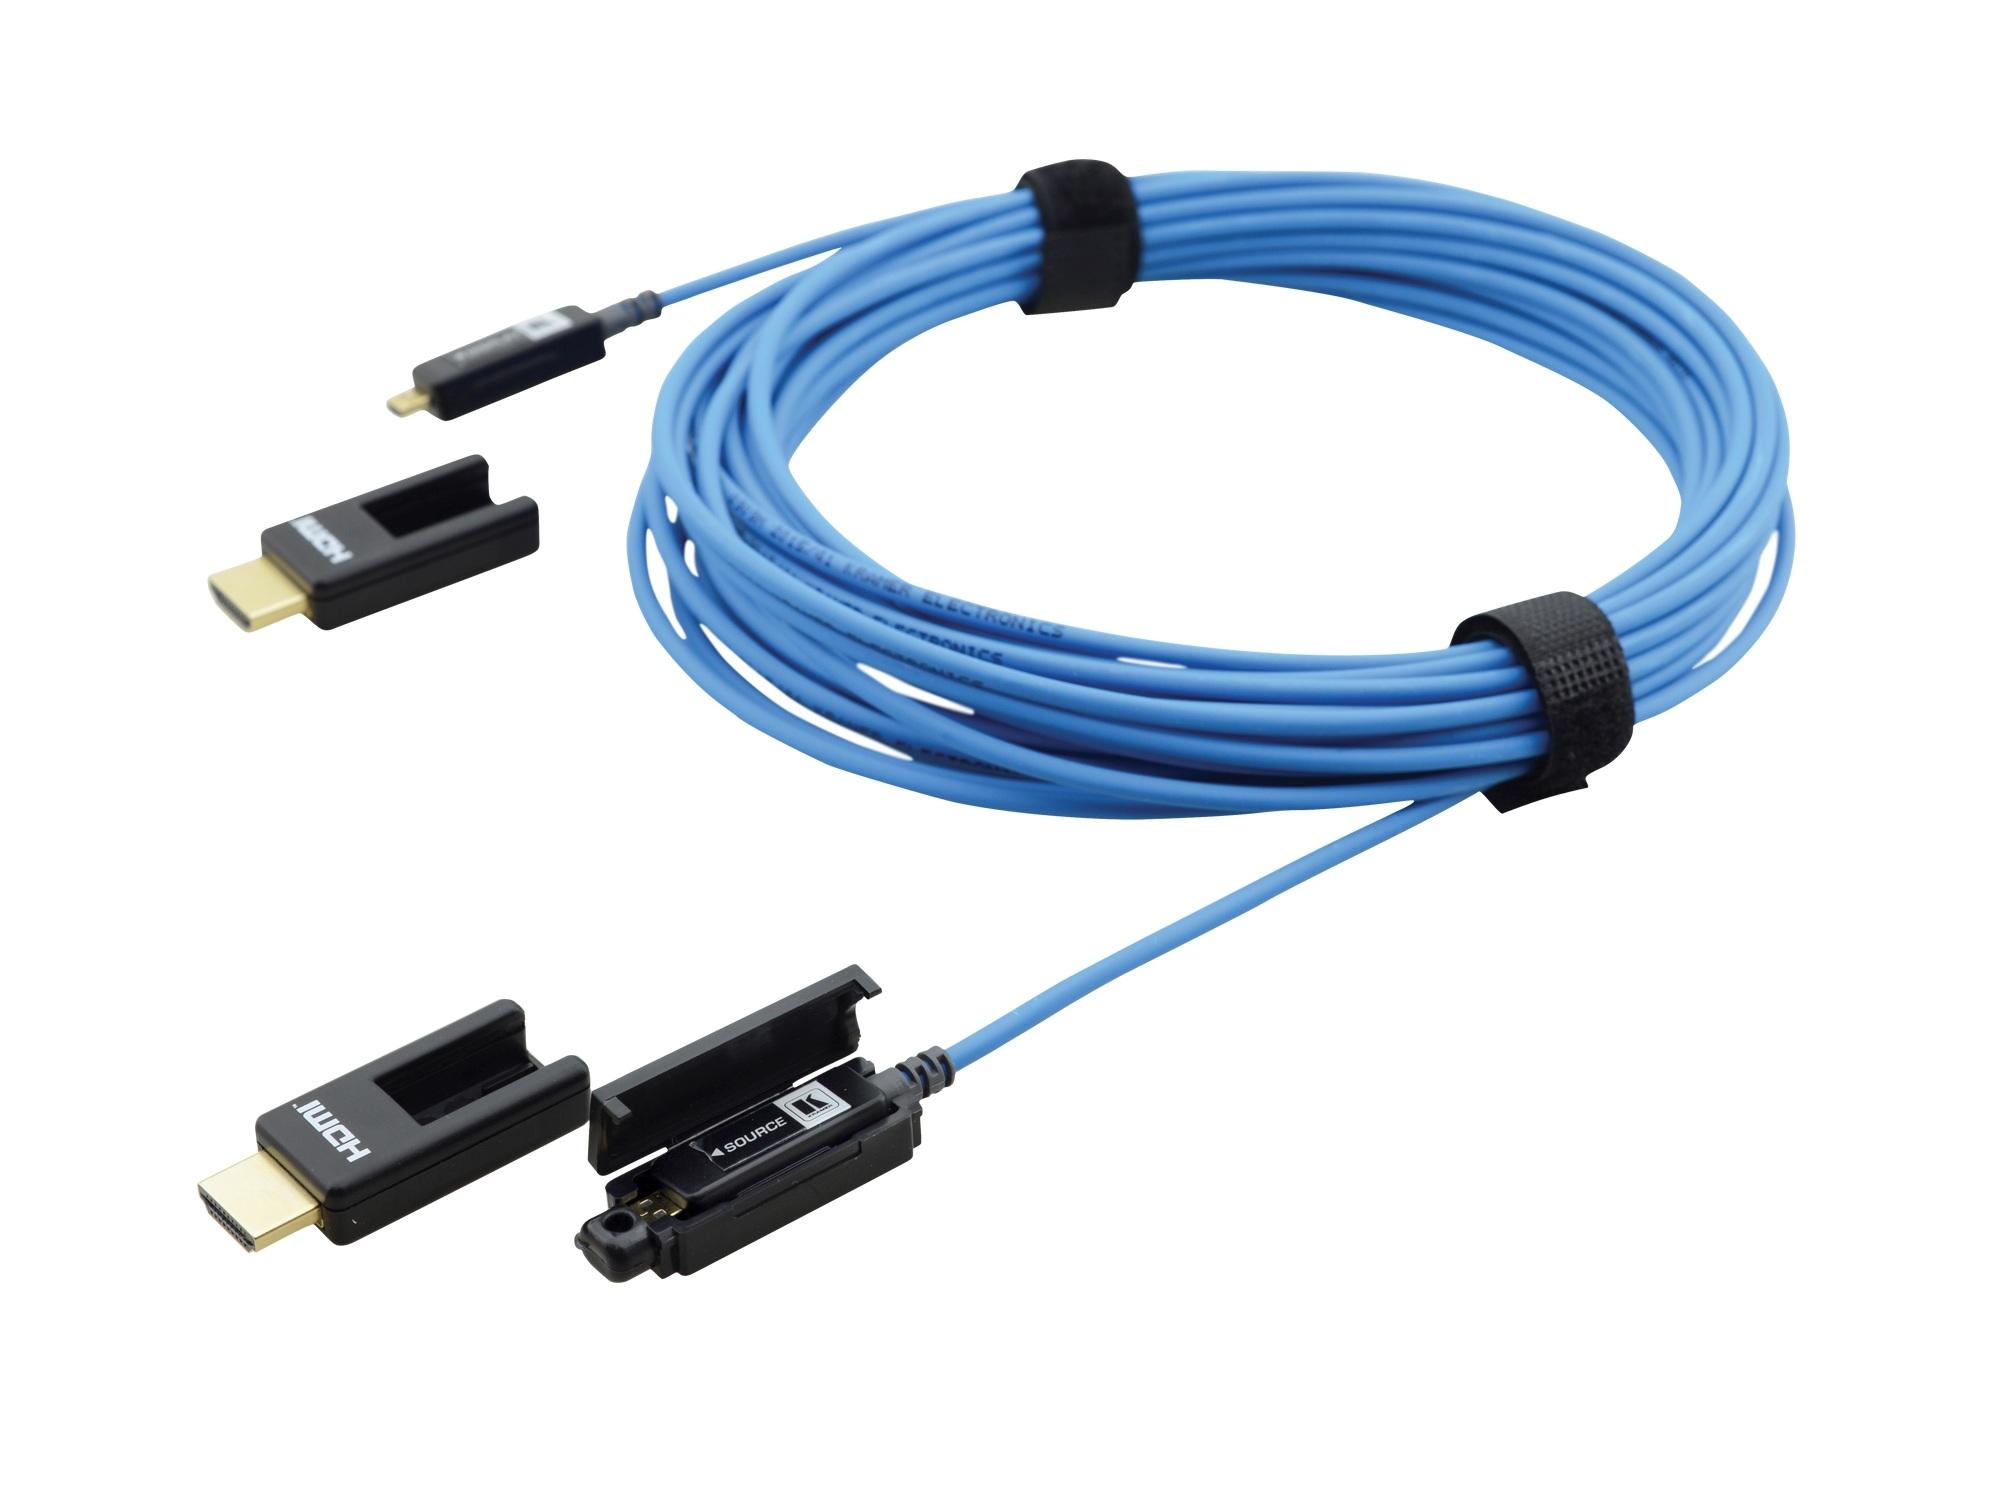 CP-AOCH/XL-230 Fiber Optic High-Speed Pluggable HDMI Cable - 230ft by Kramer